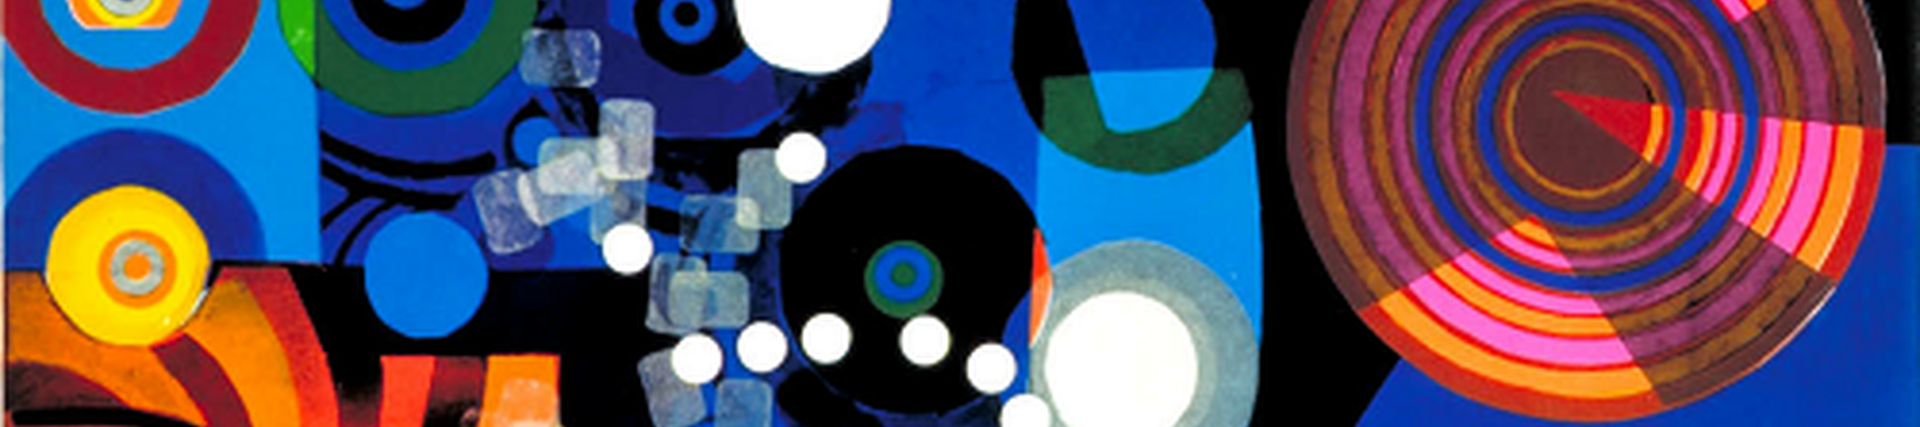 colourful print of circles and the word Cinema